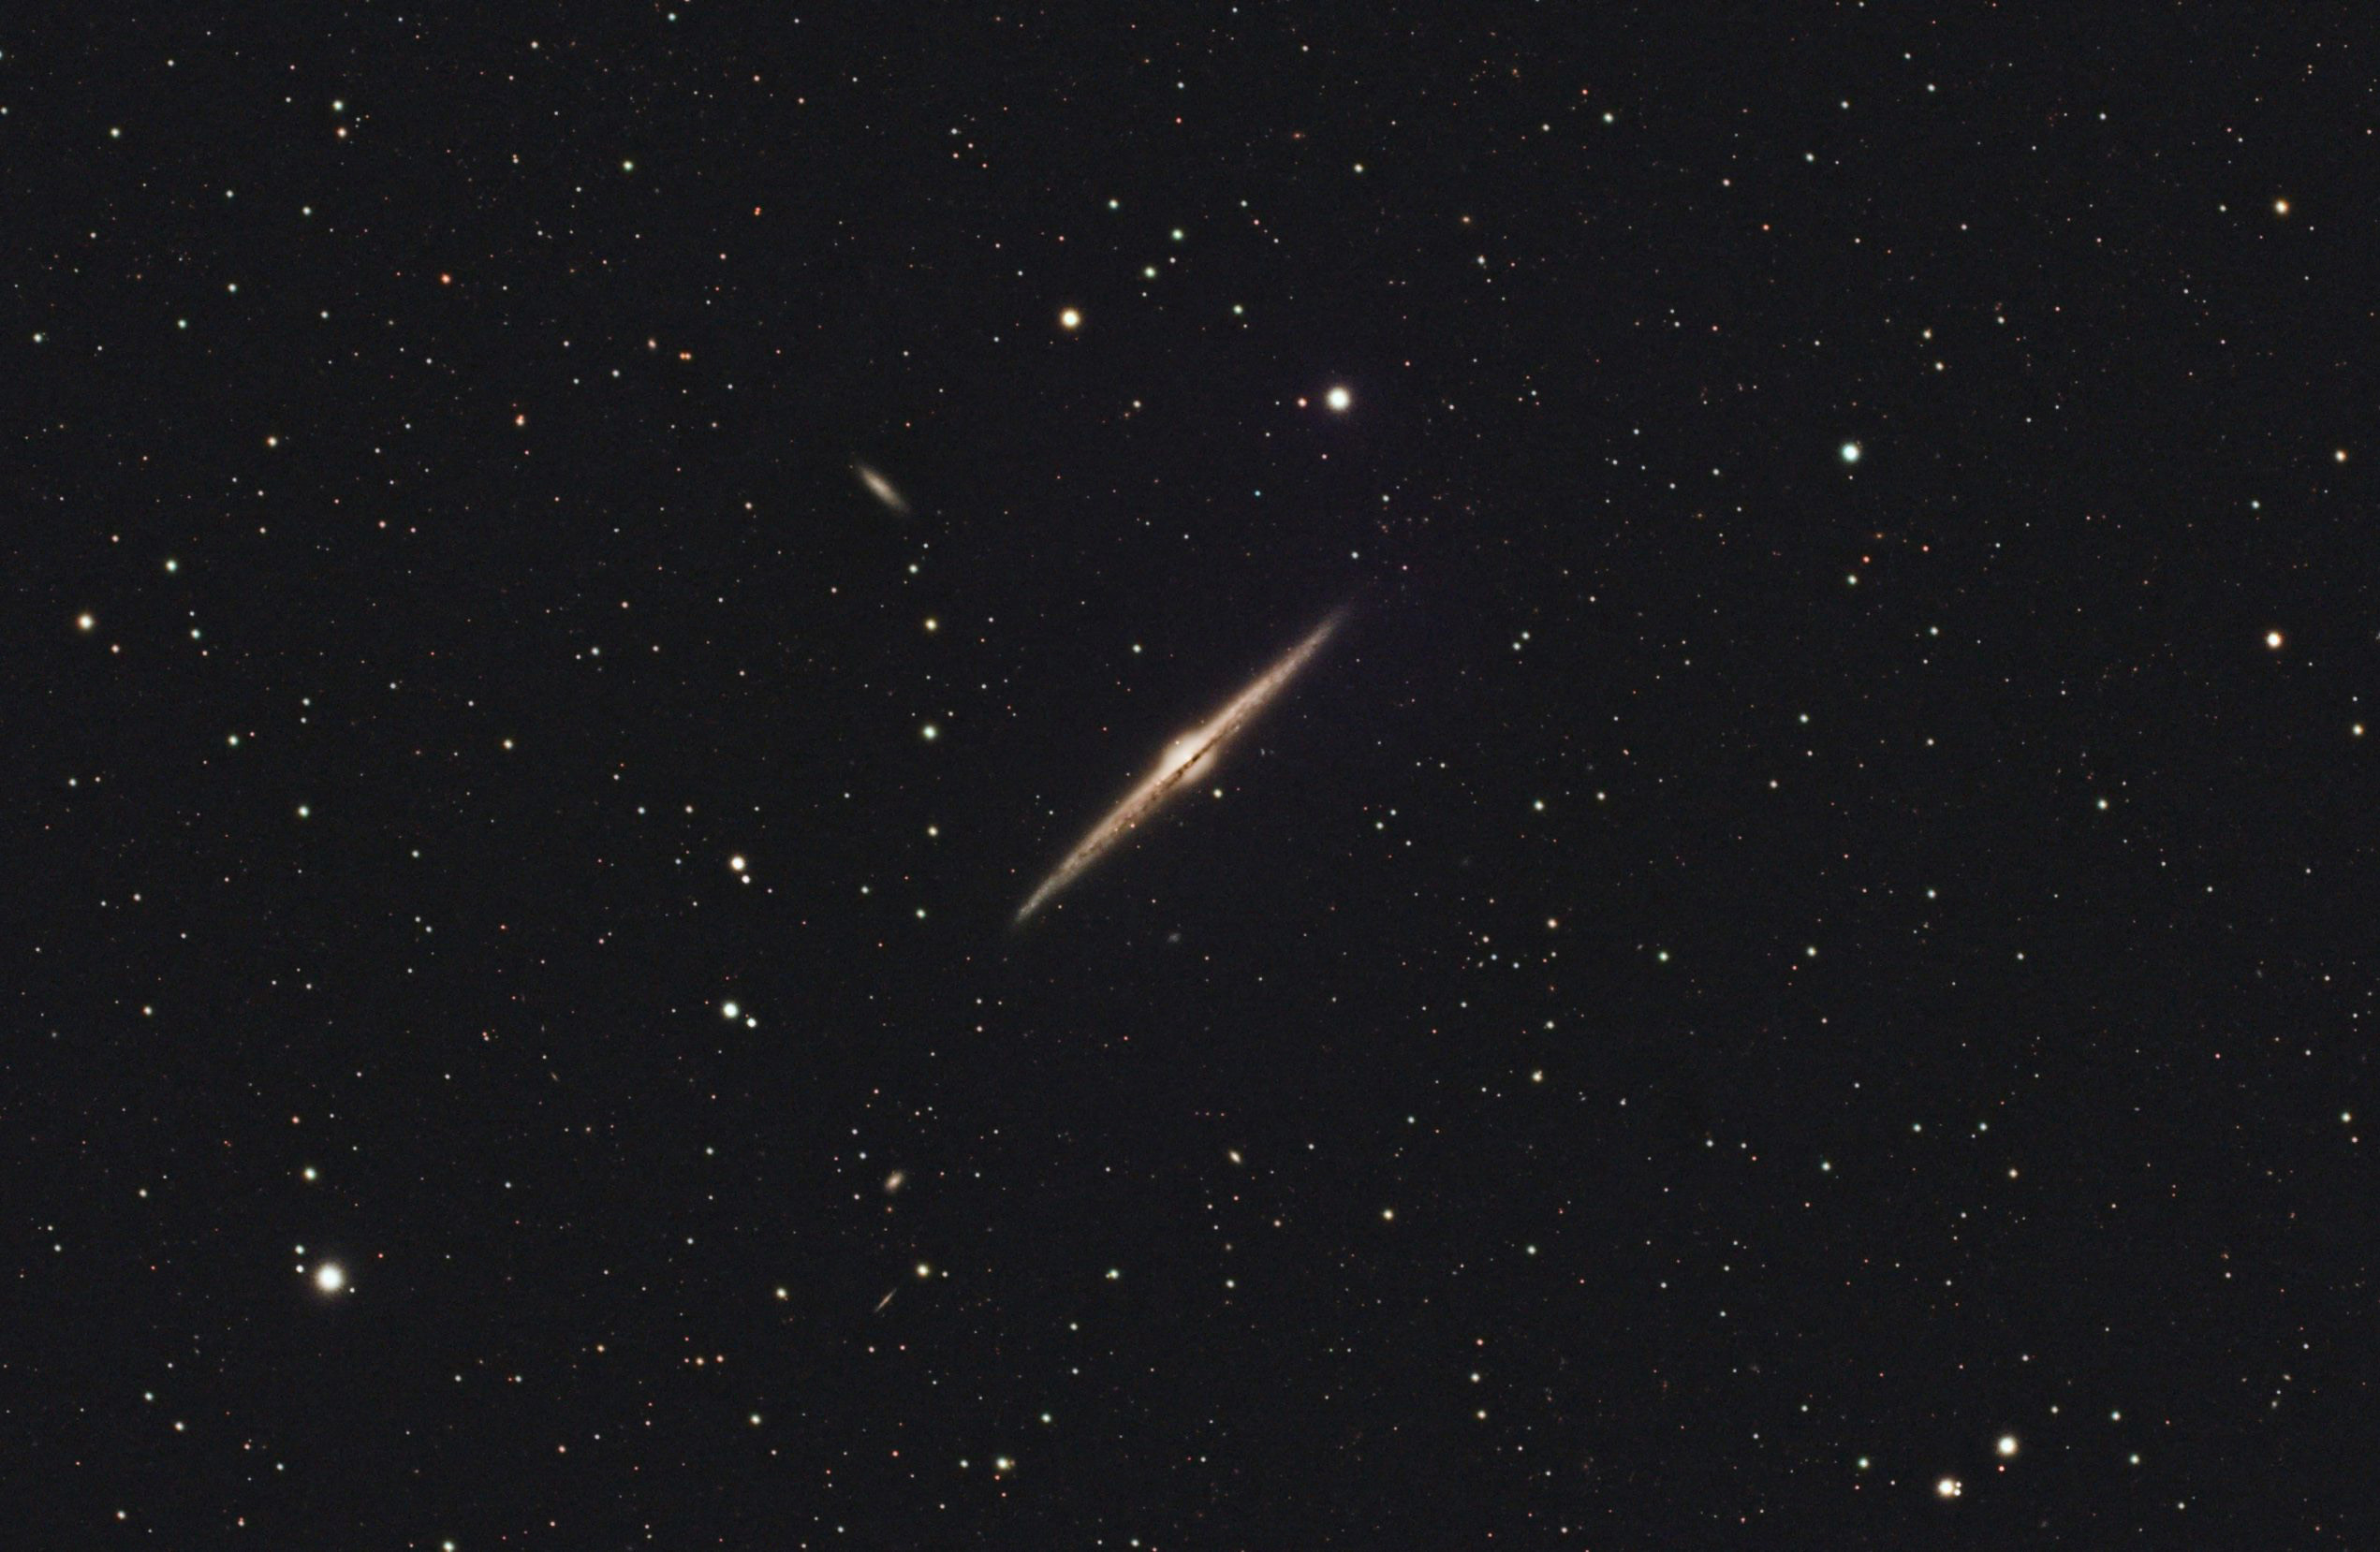 NGC 4565, the Needle Galaxy, was imaged with a ZWO ASI294MC Pro on a Takahashi FSQ-106N with 18 hours and 50 minutes of exposure.